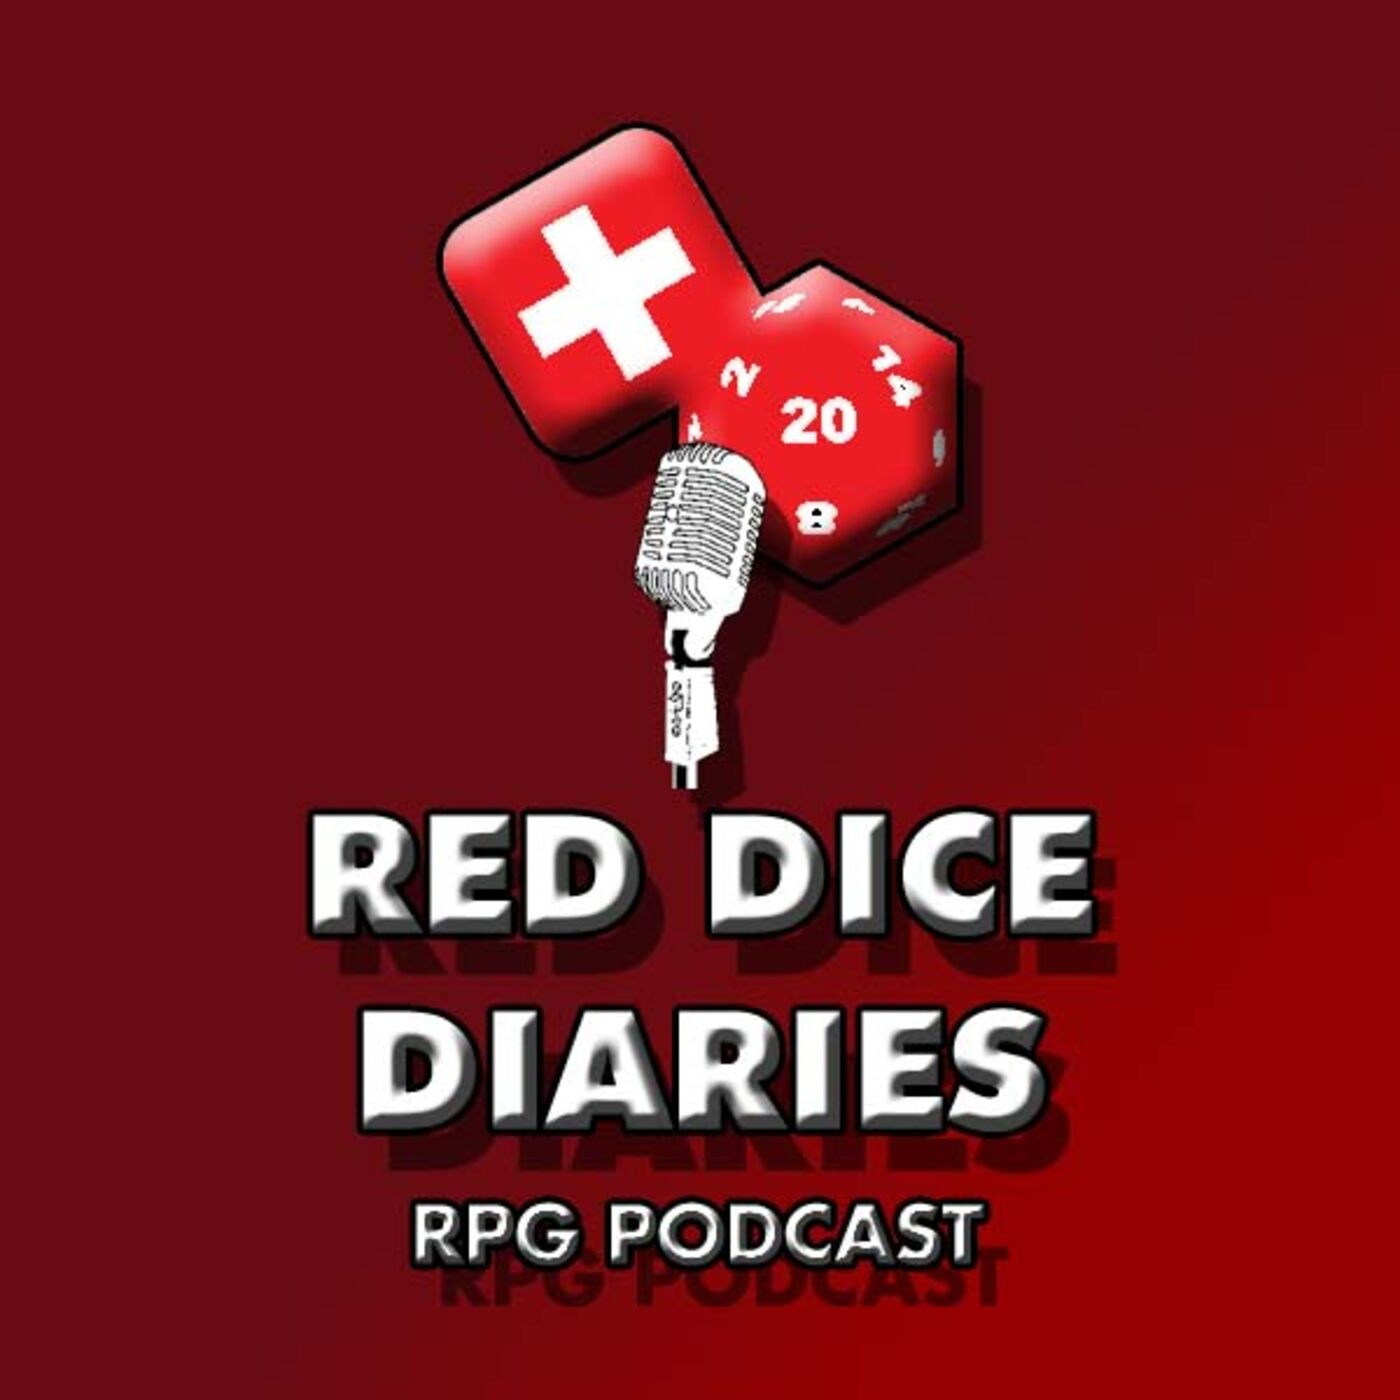 When Might it be Okay to Fudge Dice-rolls - Part 2